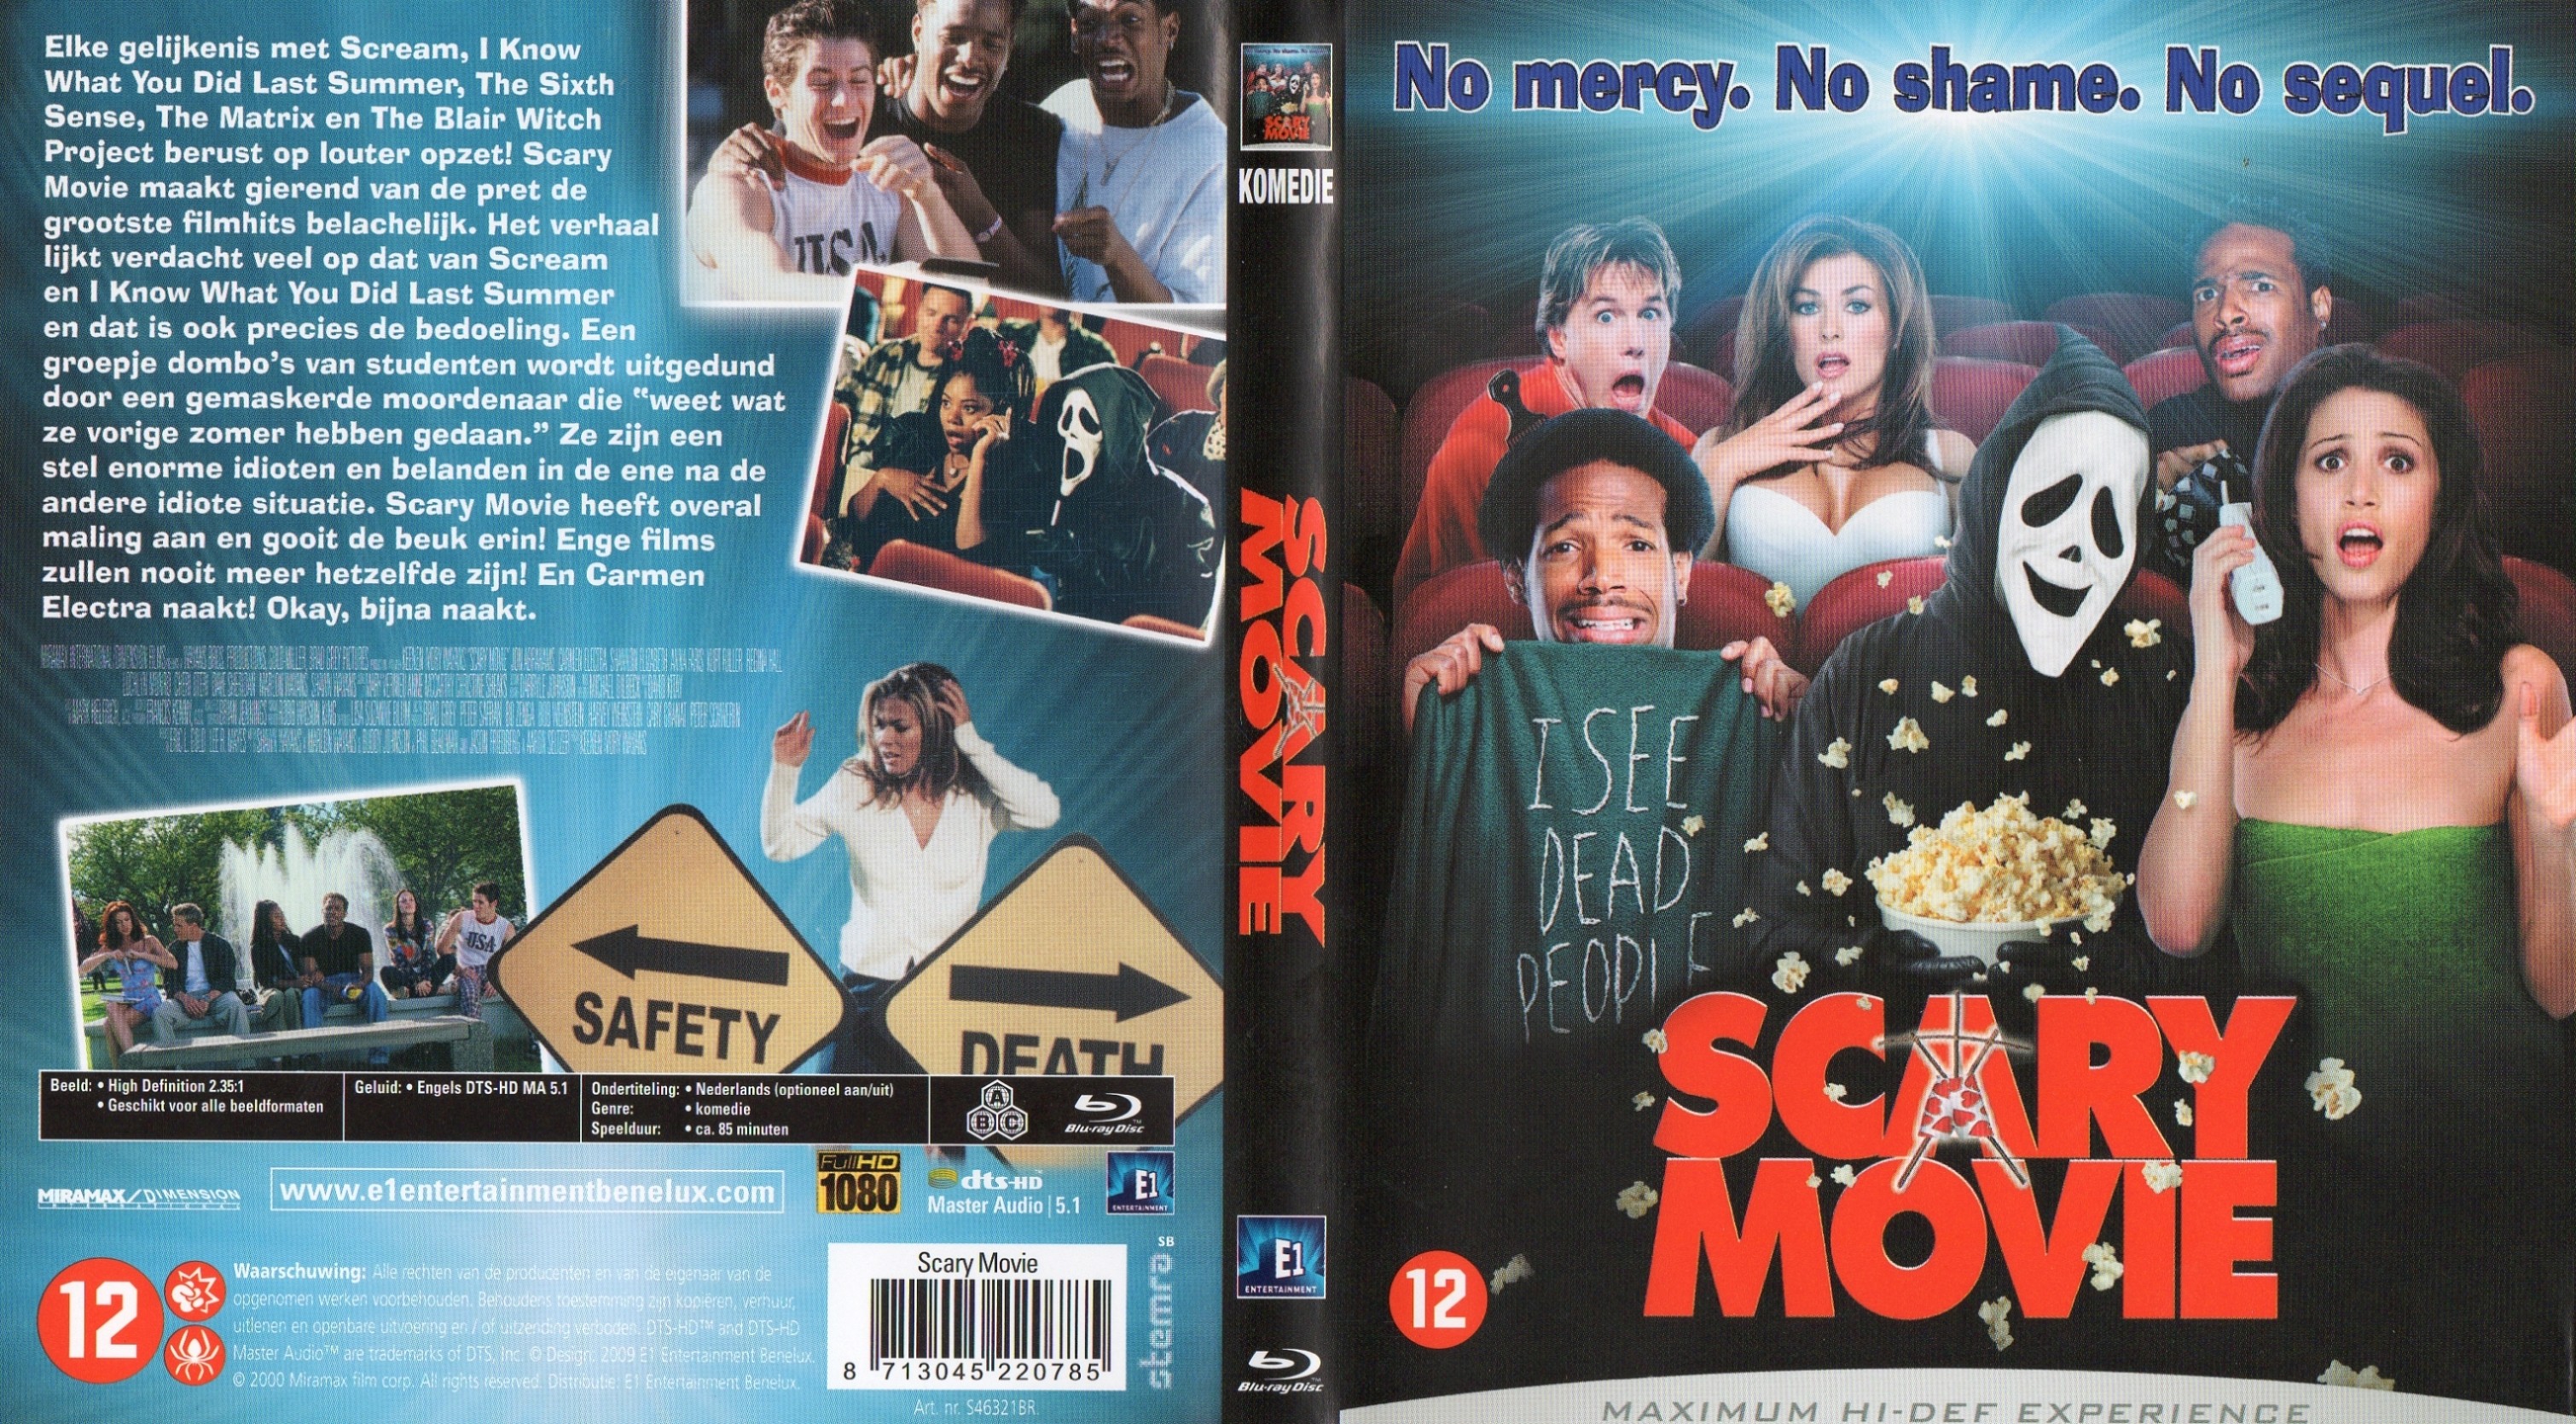 Jaquette DVD Scary Movie Zone 1 (BLU-RAY)